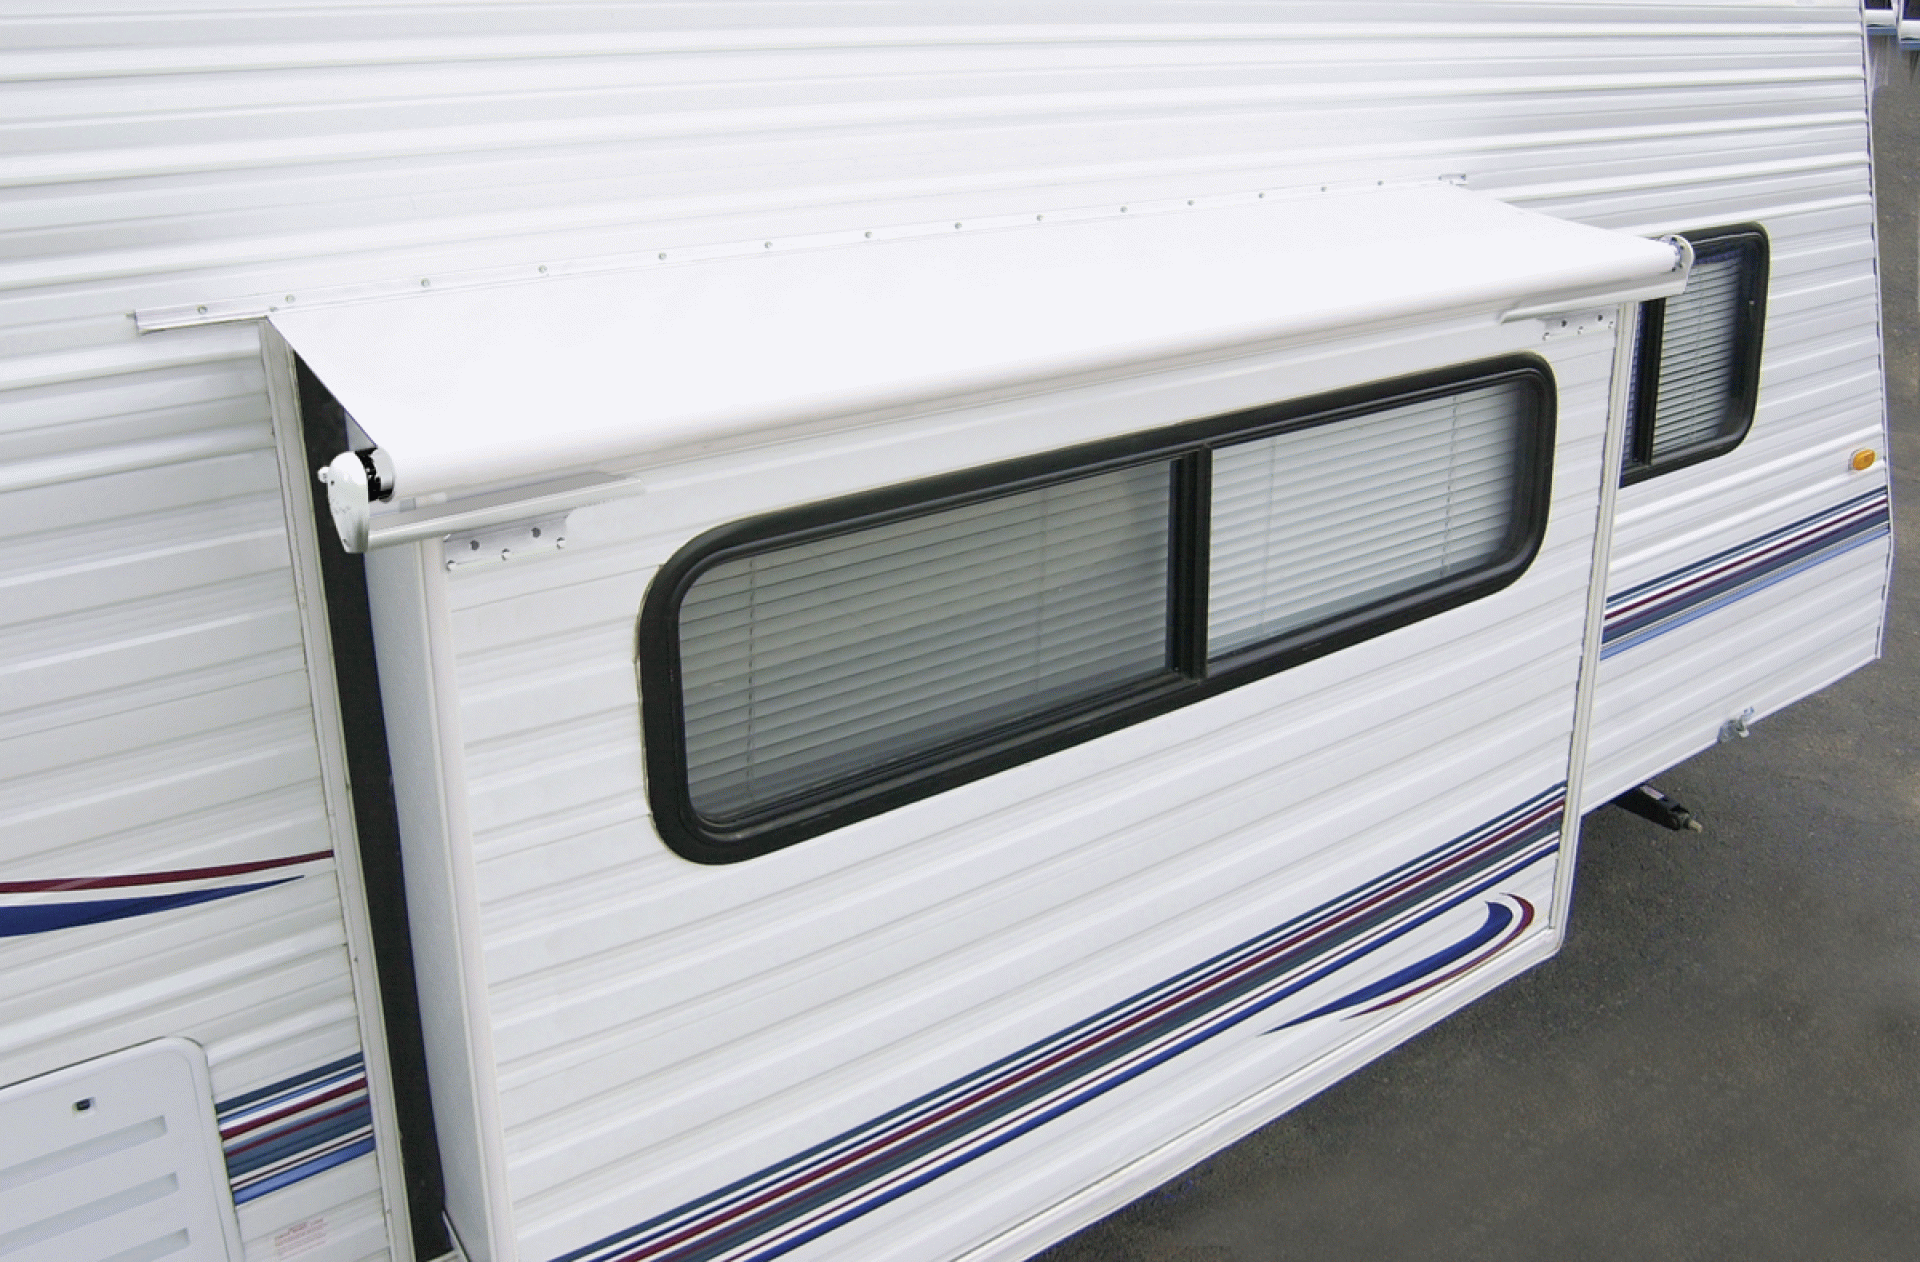 CAREFREE OF COLORADO | LH0970042 | SLIDEOUT COVER AWNING 90" - 97.9" ROOF RANGE WHITE VINYL